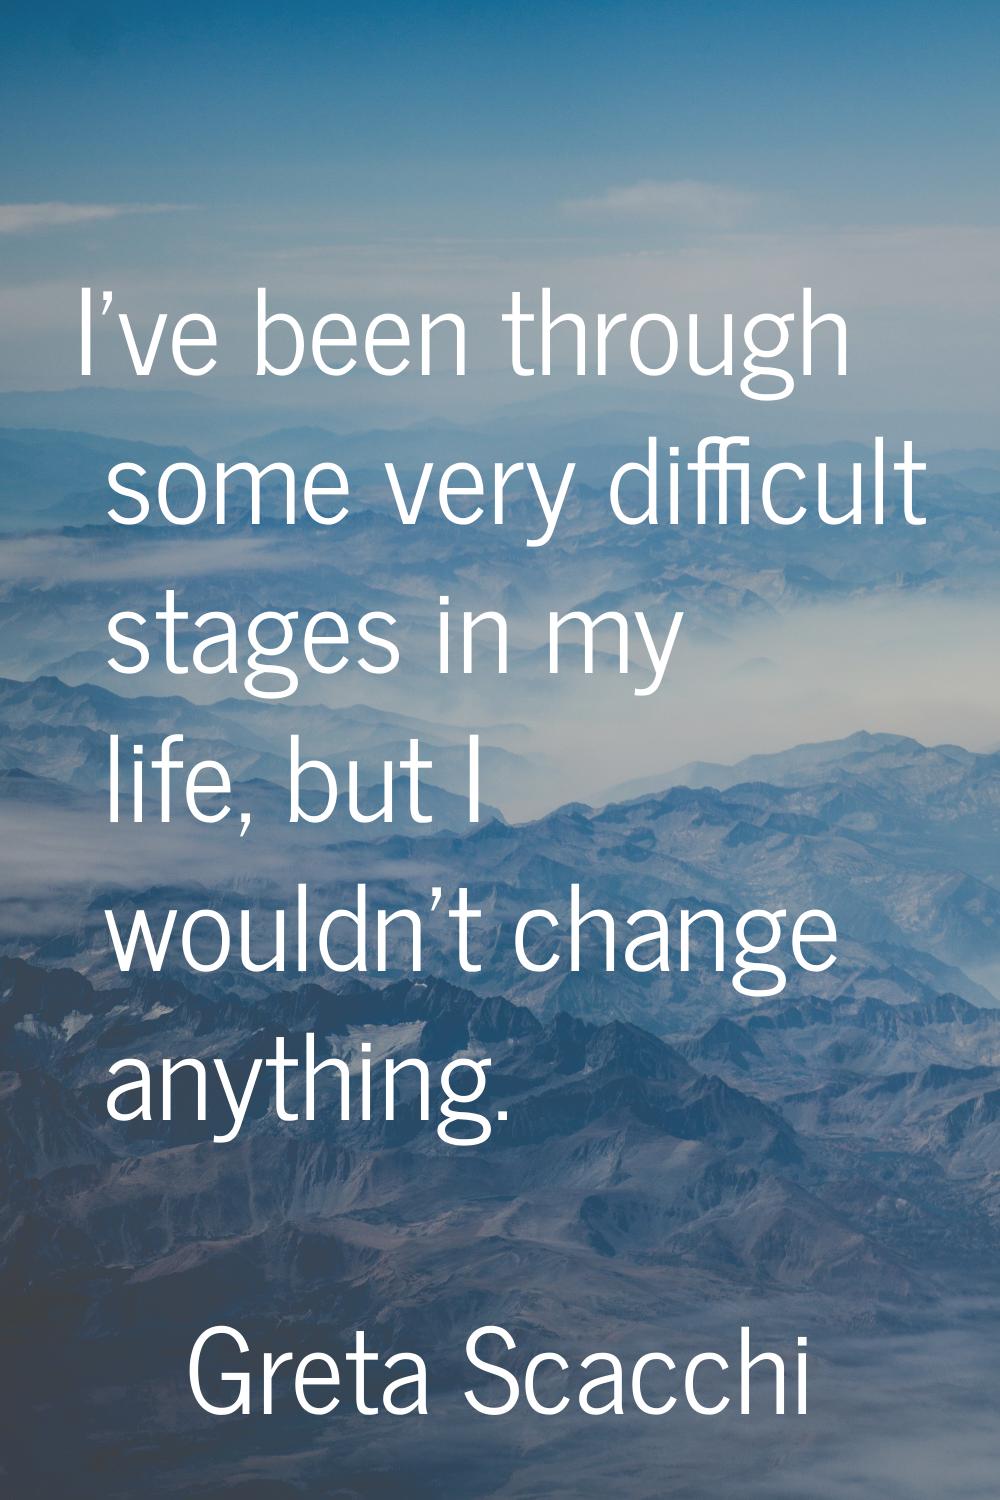 I've been through some very difficult stages in my life, but I wouldn't change anything.